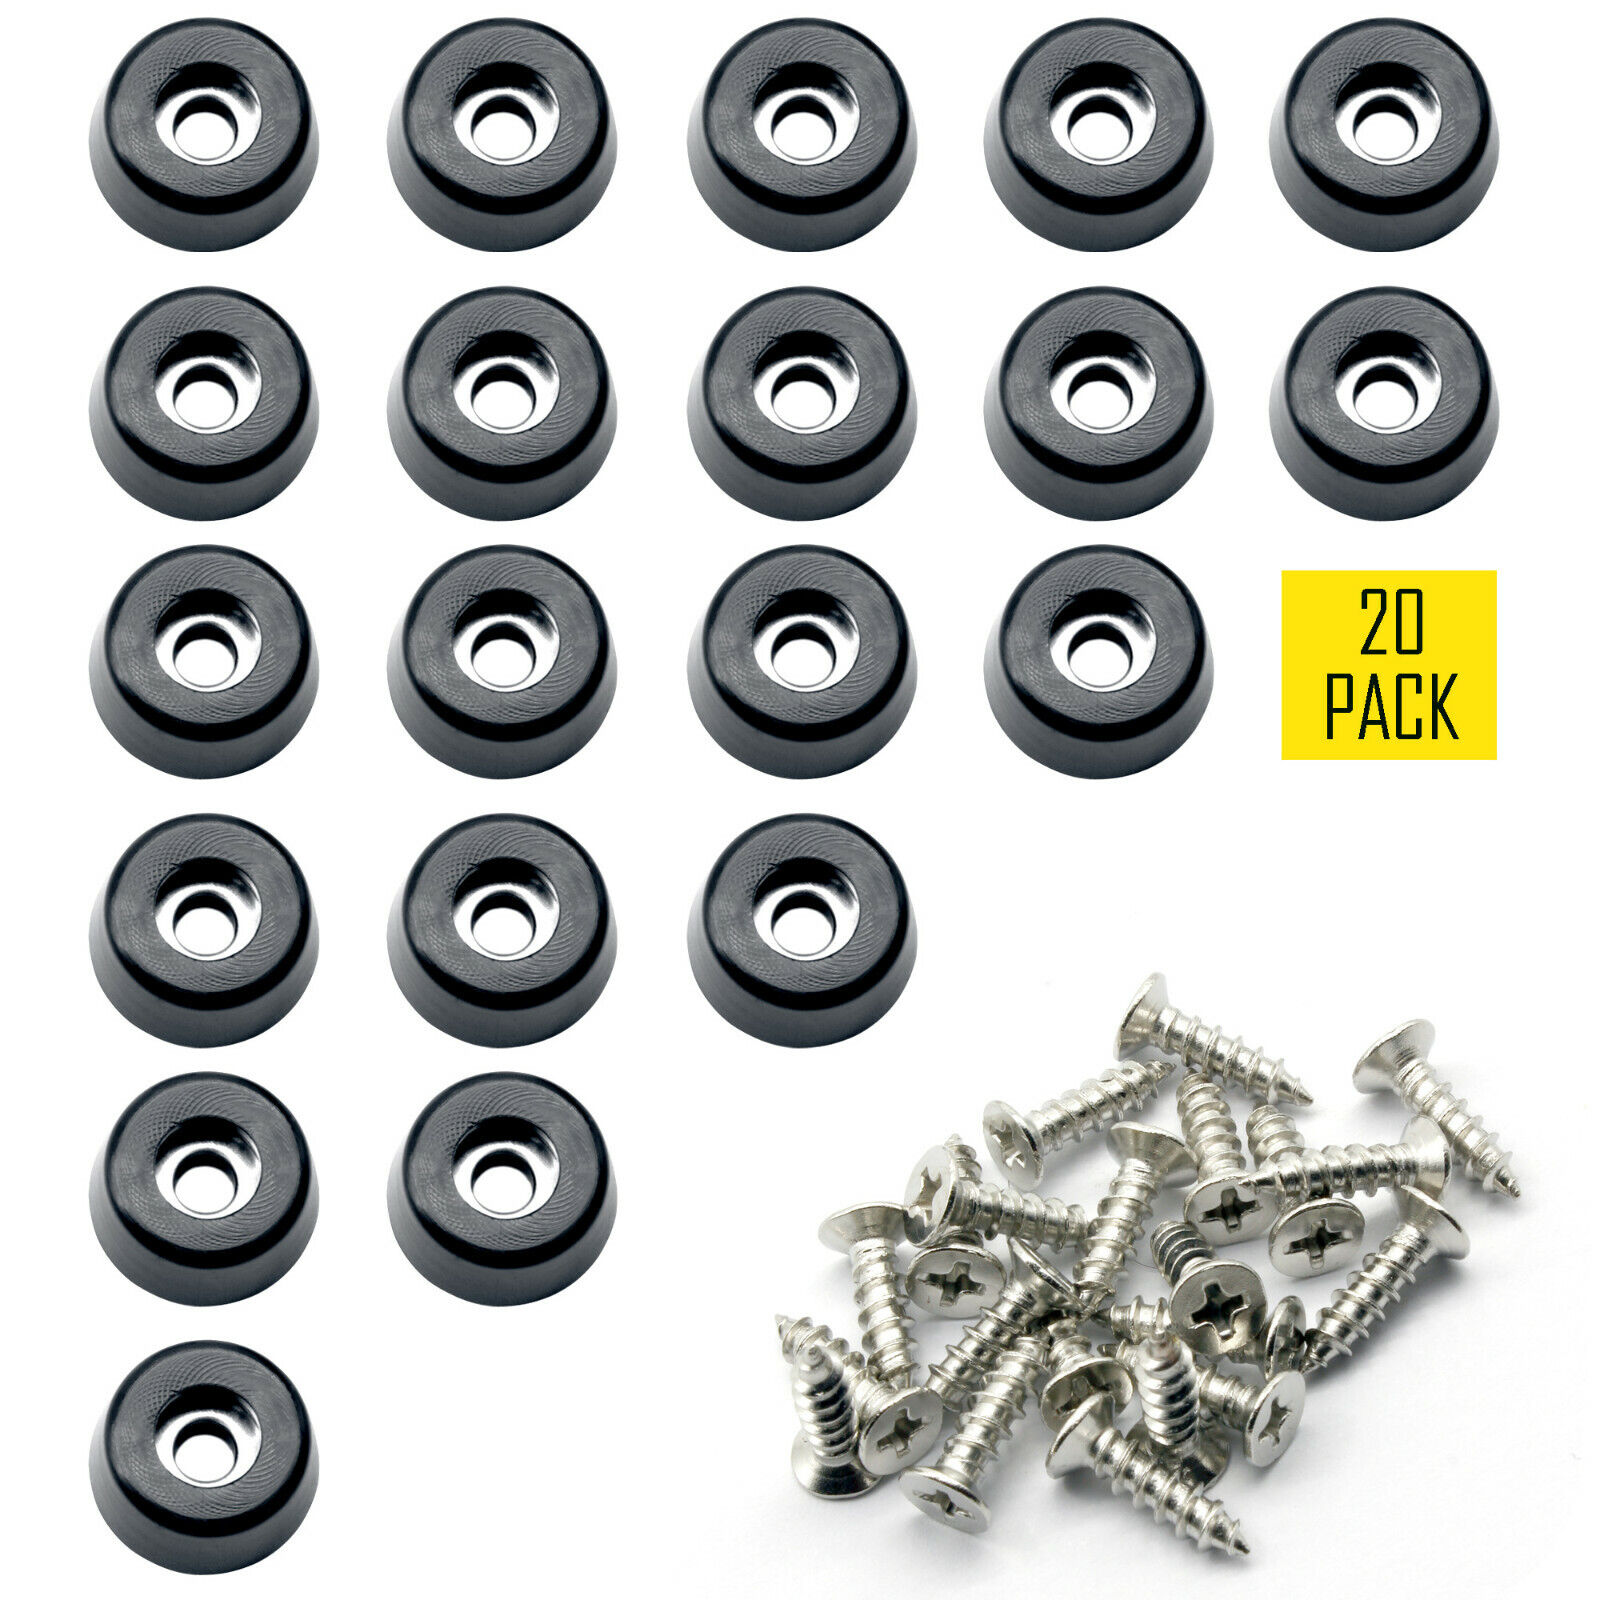 3/4" Small Hard Rubber Bumper Feet With Stainless Washer And Screws, 20 Pack